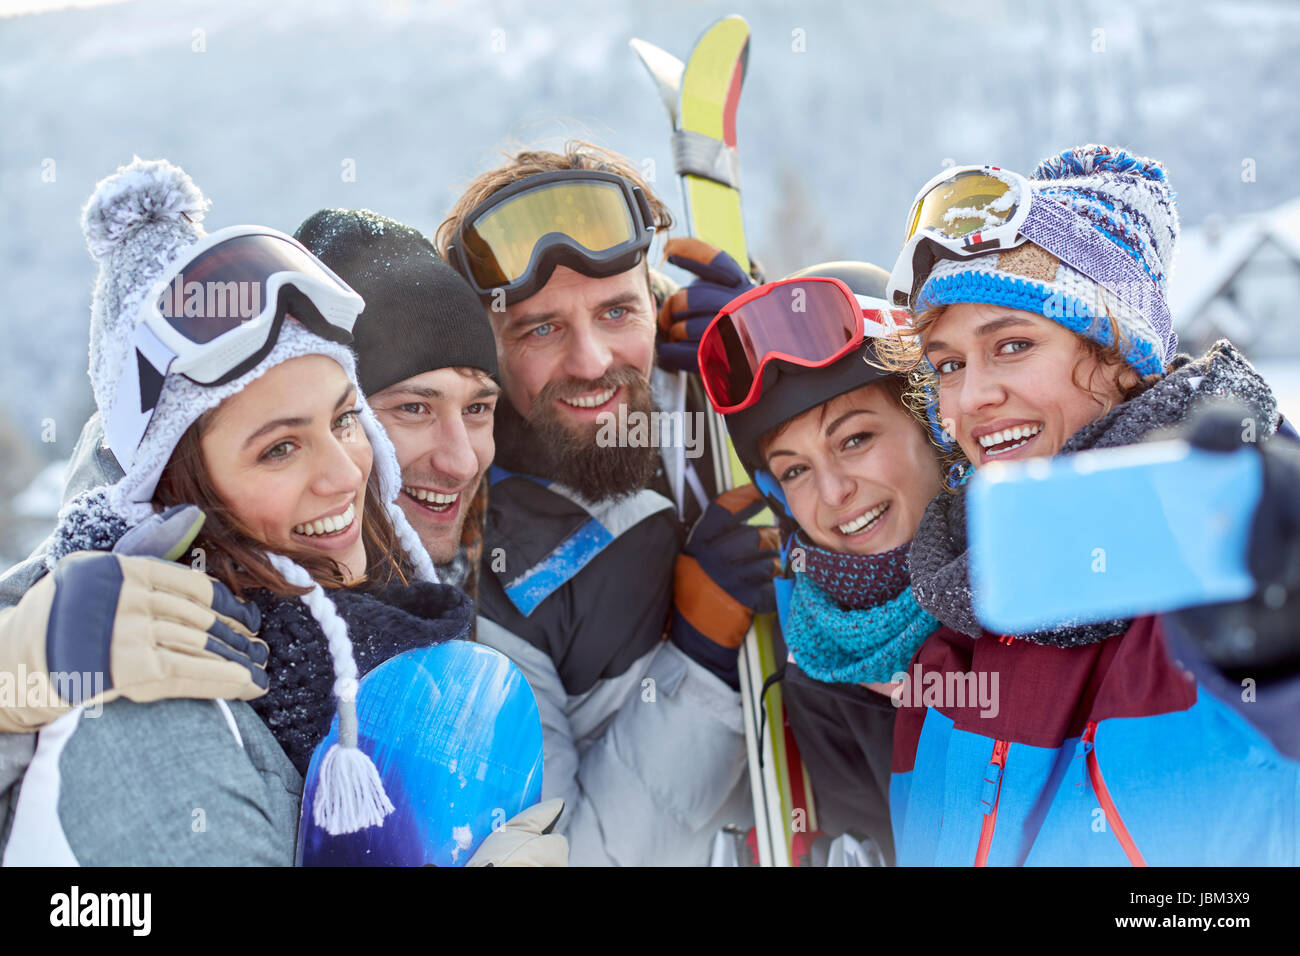 Smiling skier friends taking selfie with camera phone Stock Photo